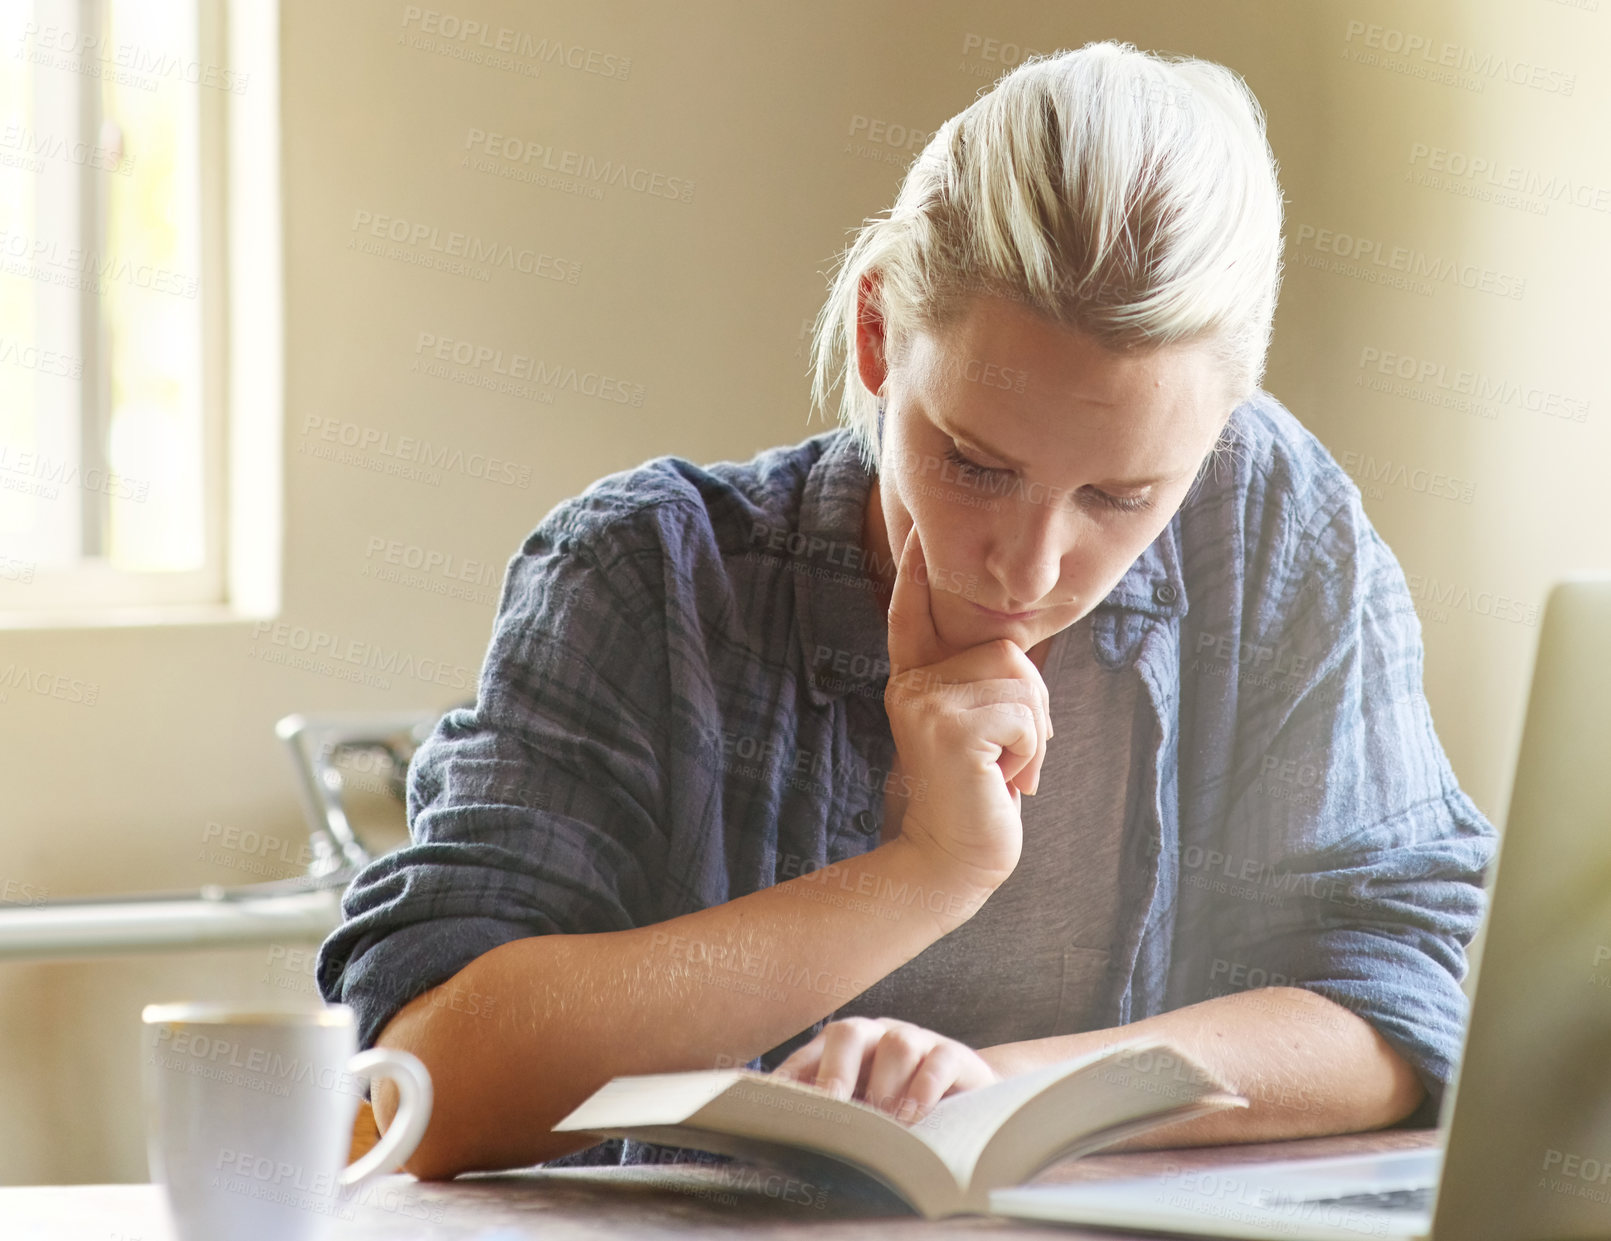 Buy stock photo Shot of a young woman looking thoughtful while reading a book at her desk